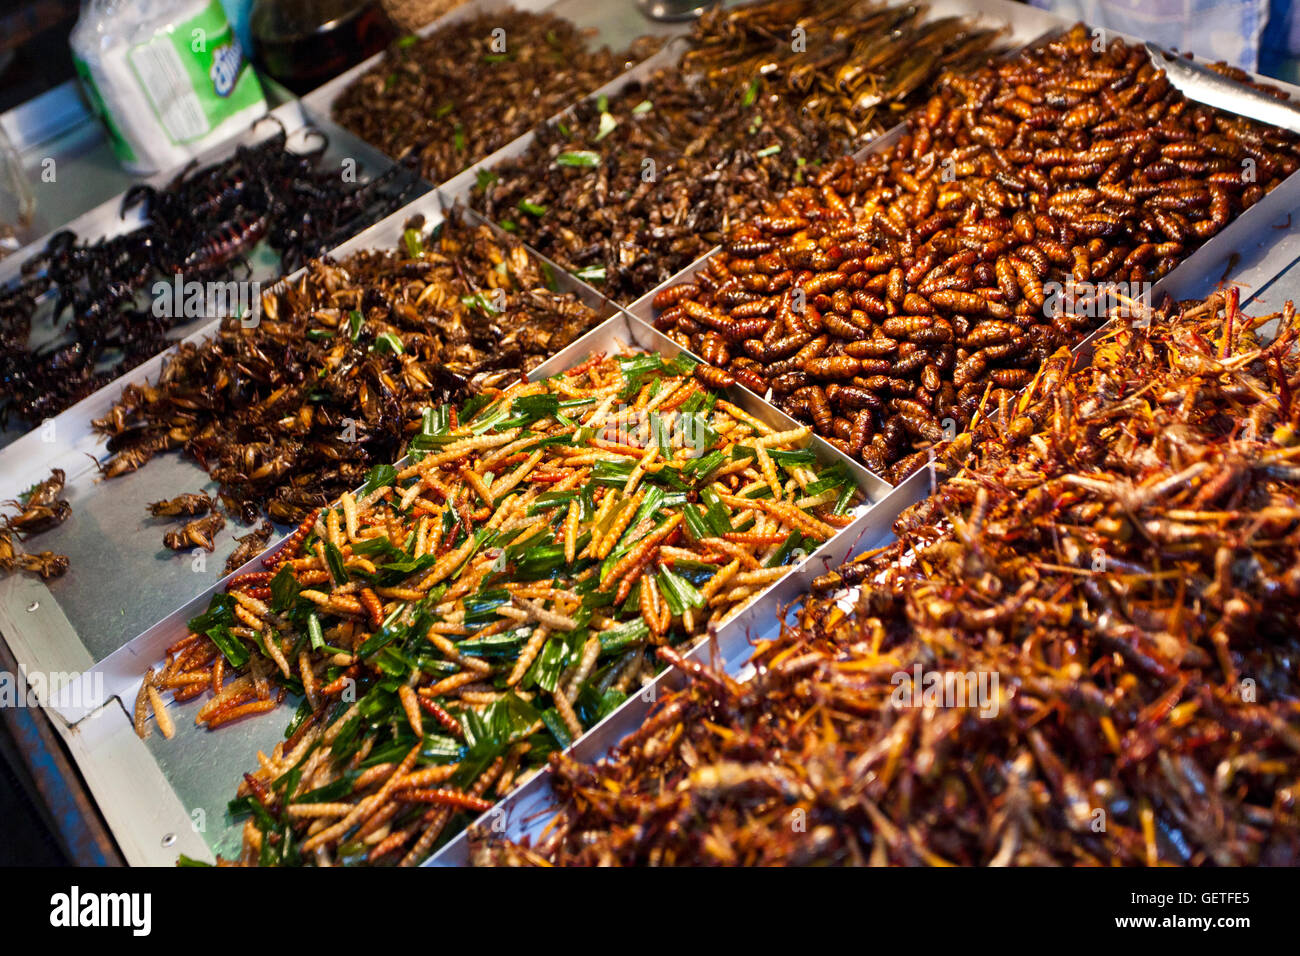 Cooked scorpions and other invertebrates available to eat as street food from food stalls on the Khao San road in Bangkok. Stock Photo